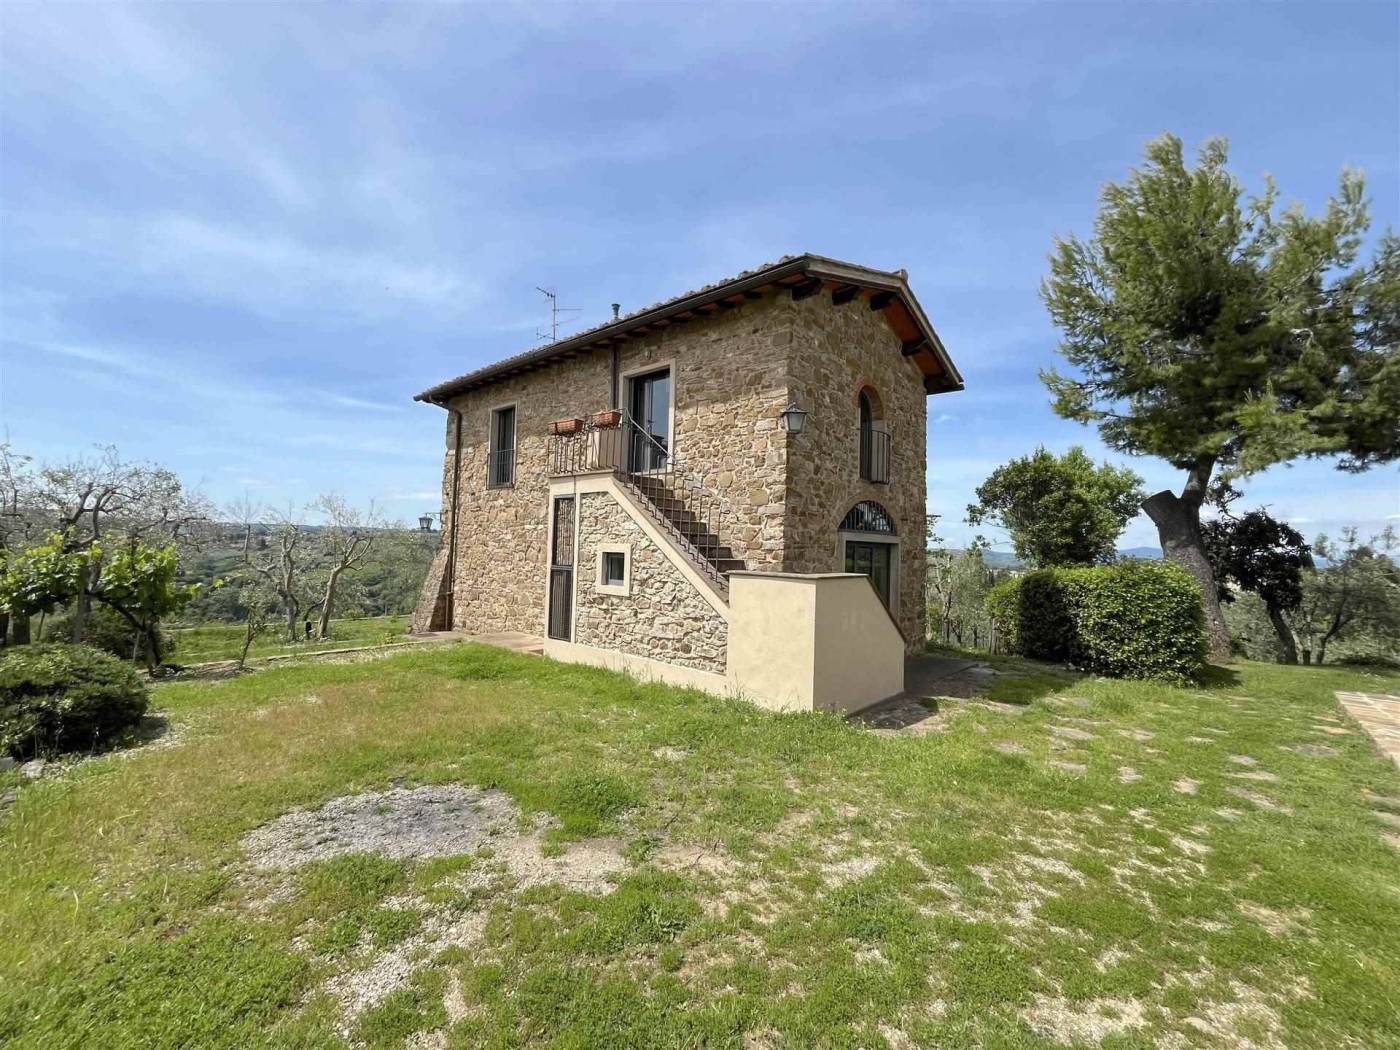 VE35TTVIBA, FLORENCE, ARCETRI/P.DEI GIULLARI, RUSTIC STONE VILLA 125 m2 EXCELLENT GENERAL CONDITIONS. Also ideal as an investment.Eu.890,000 Between 